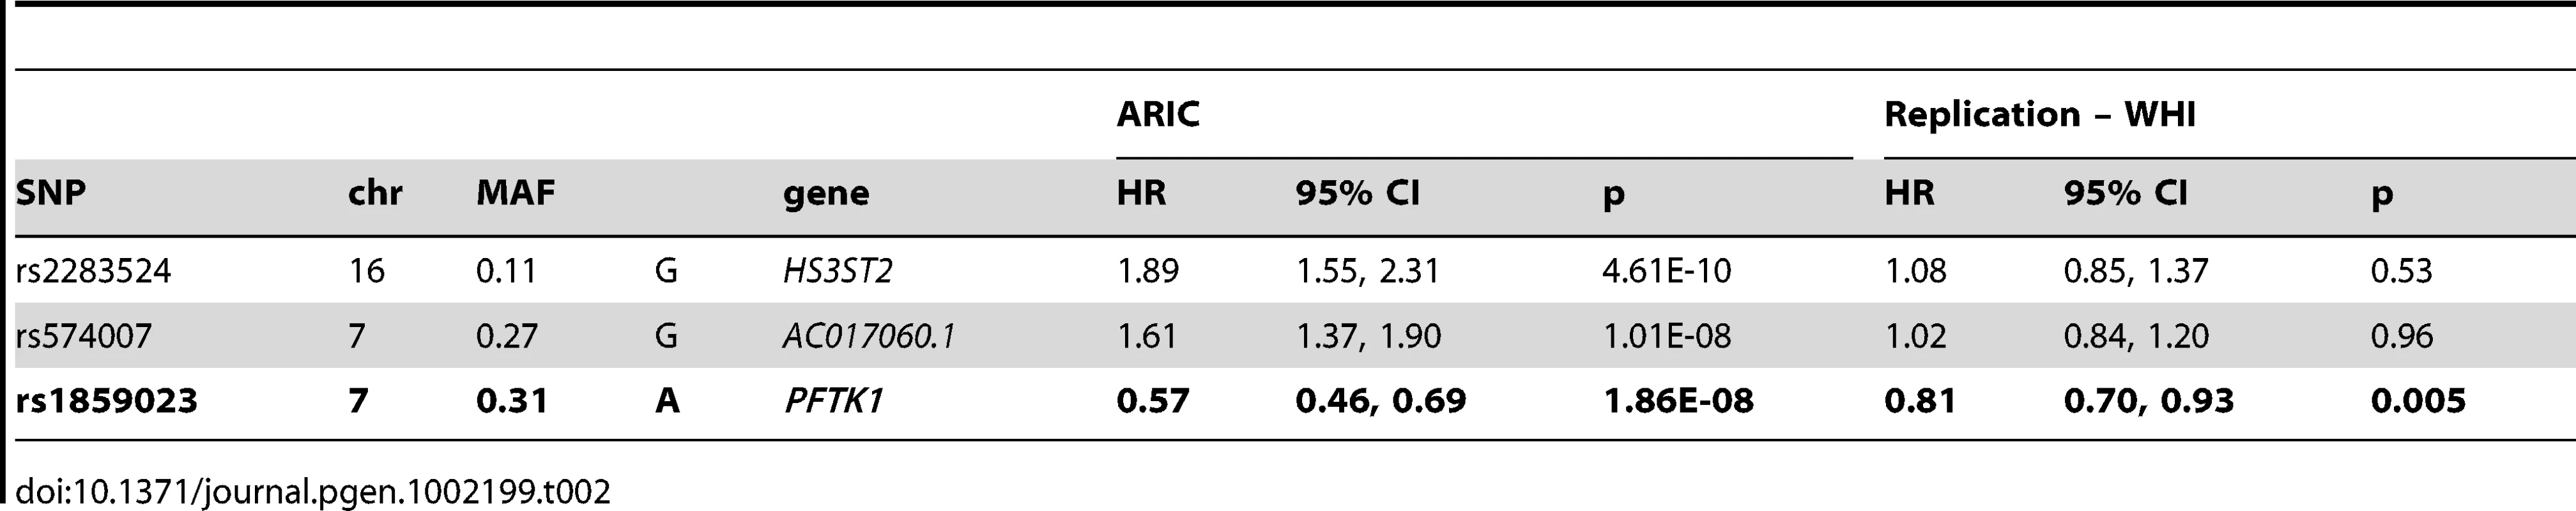 Association results for genome-wide significant variants associated with incident CHD in ARIC African Americans and replication results in WHI.